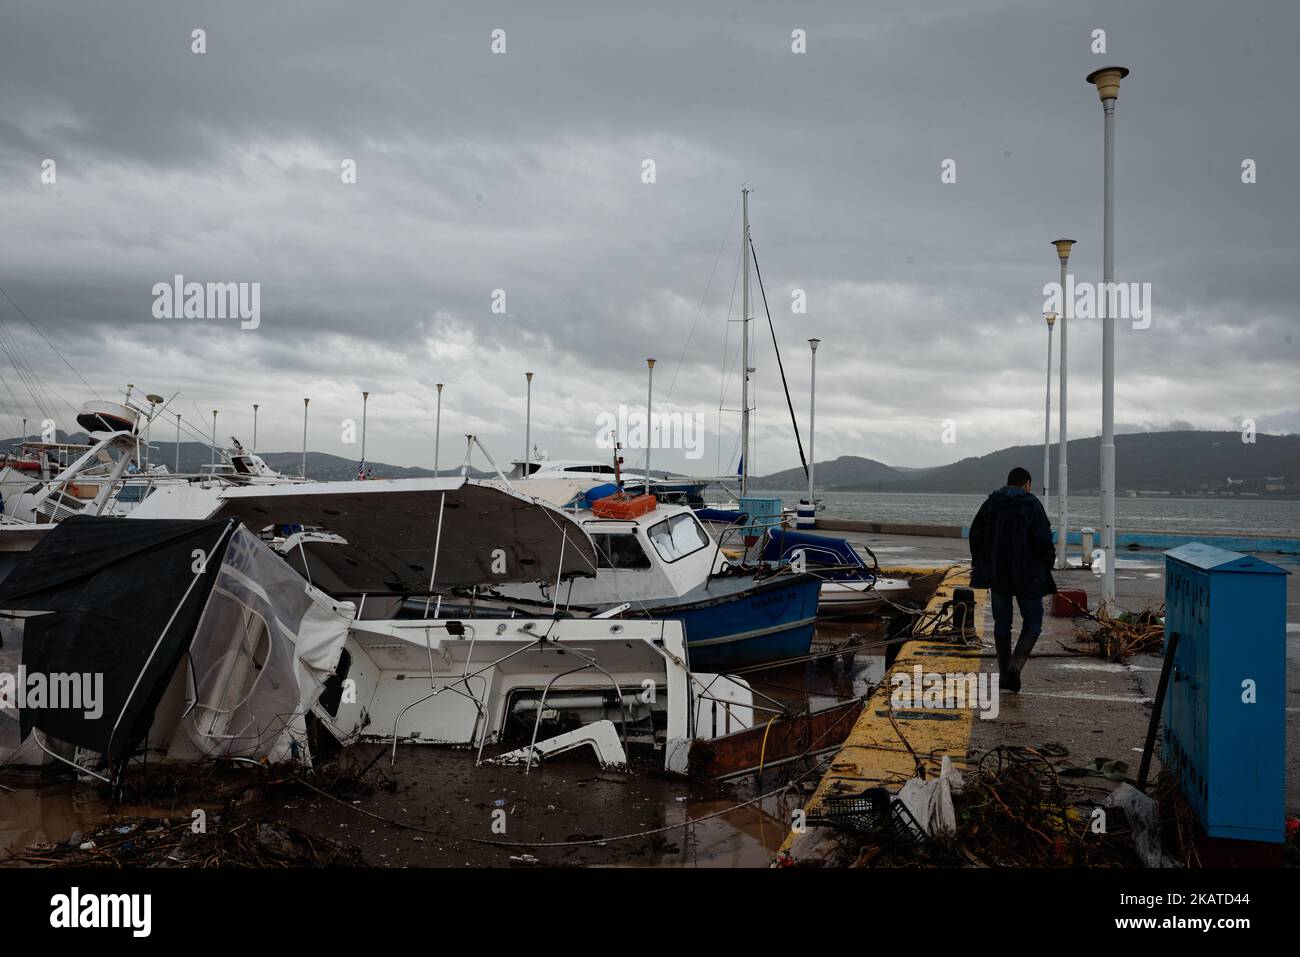 Damages caused by floods are seen at the harbour of Nea Peramos, Greece on November 17, 2017. Flash floods have killed 16 people causing 'biblical damage' as fast-flowing torrents of red mud flooded roads in the western outskirts of the Greek capital, Athens. (Photo by Gerasimos Koilakos/NurPhoto) Stock Photo